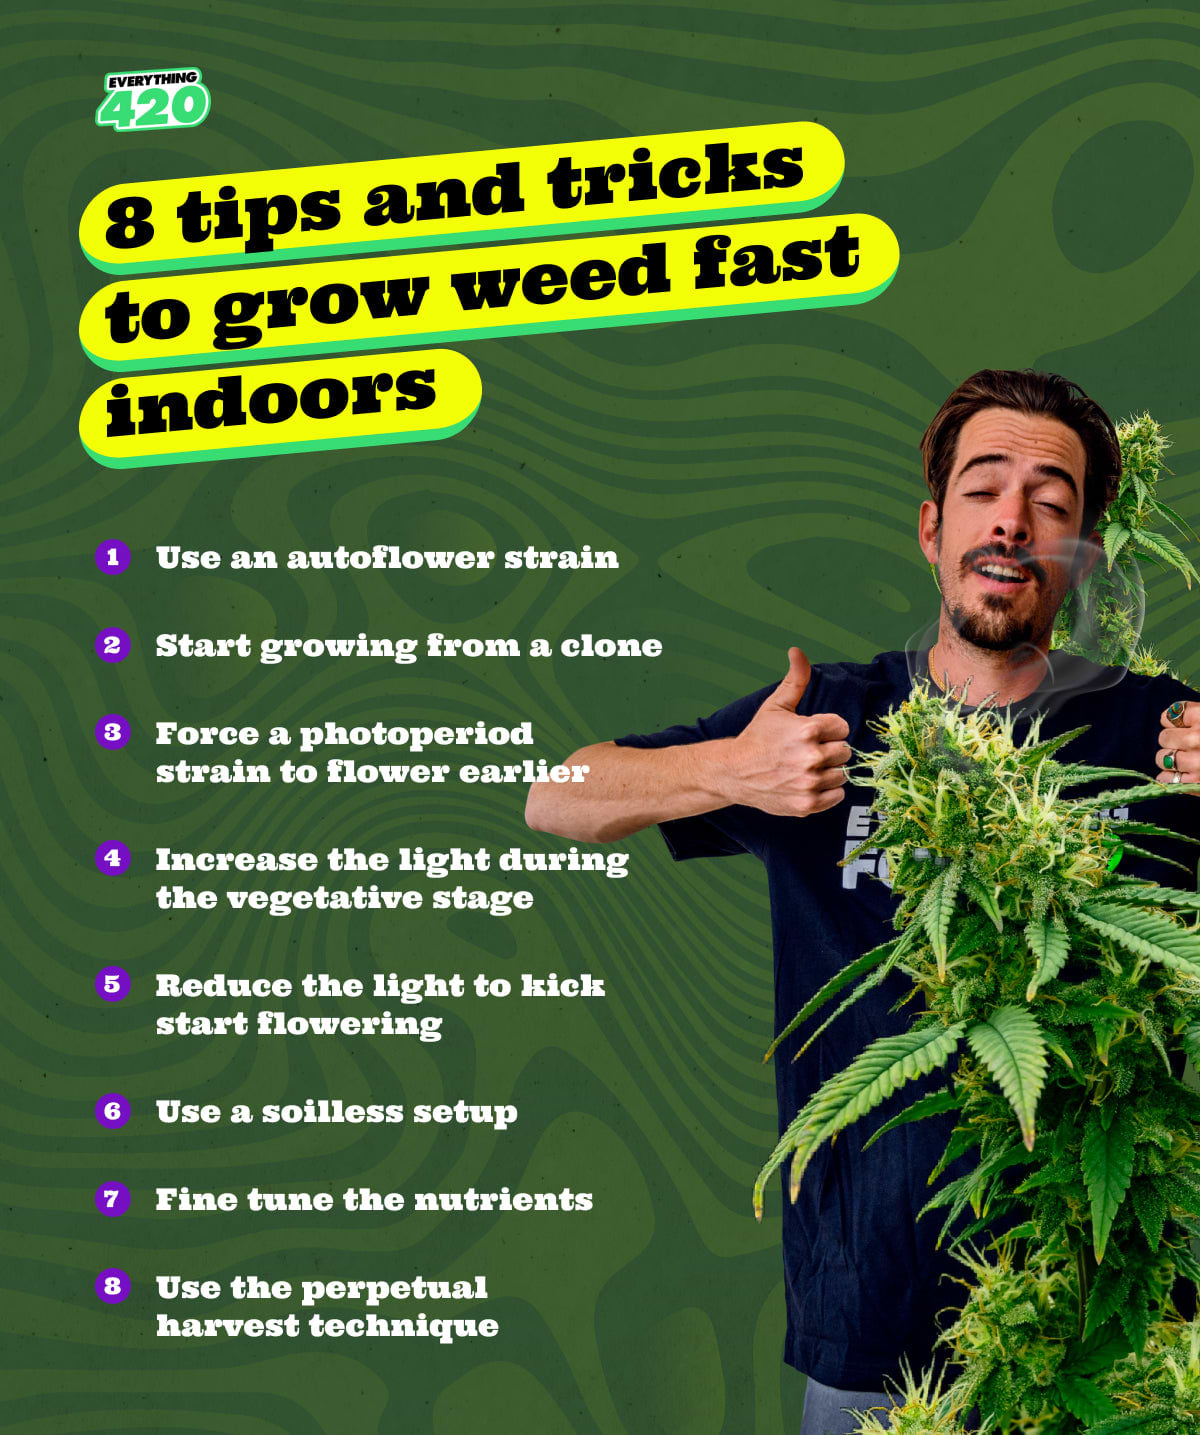 8 tips and tricks to grow weed fast indoors